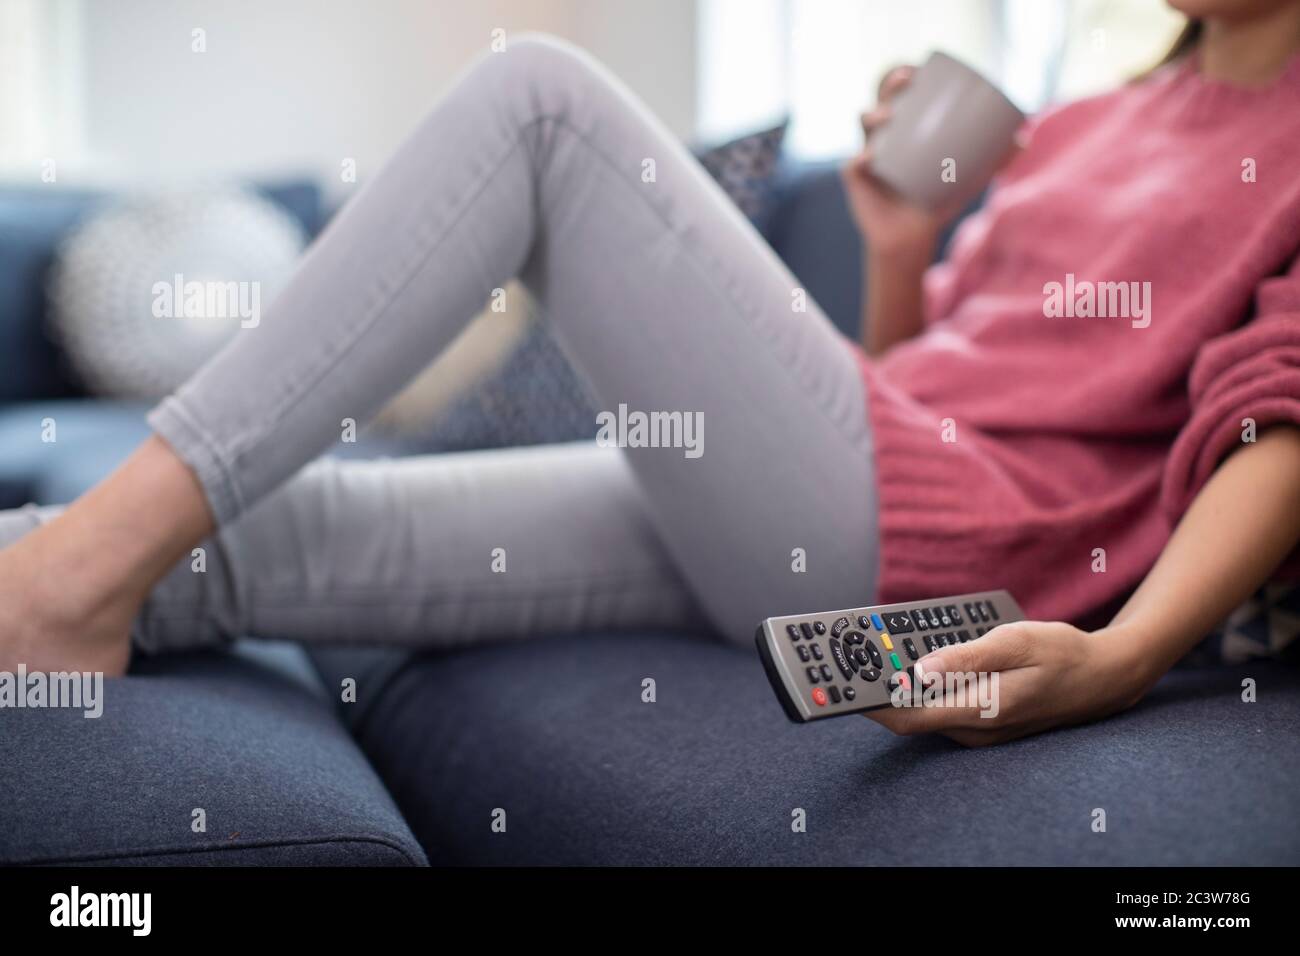 Detail Of Woman Relaxing On Sofa Holding Remote Control And Watching Television Stock Photo